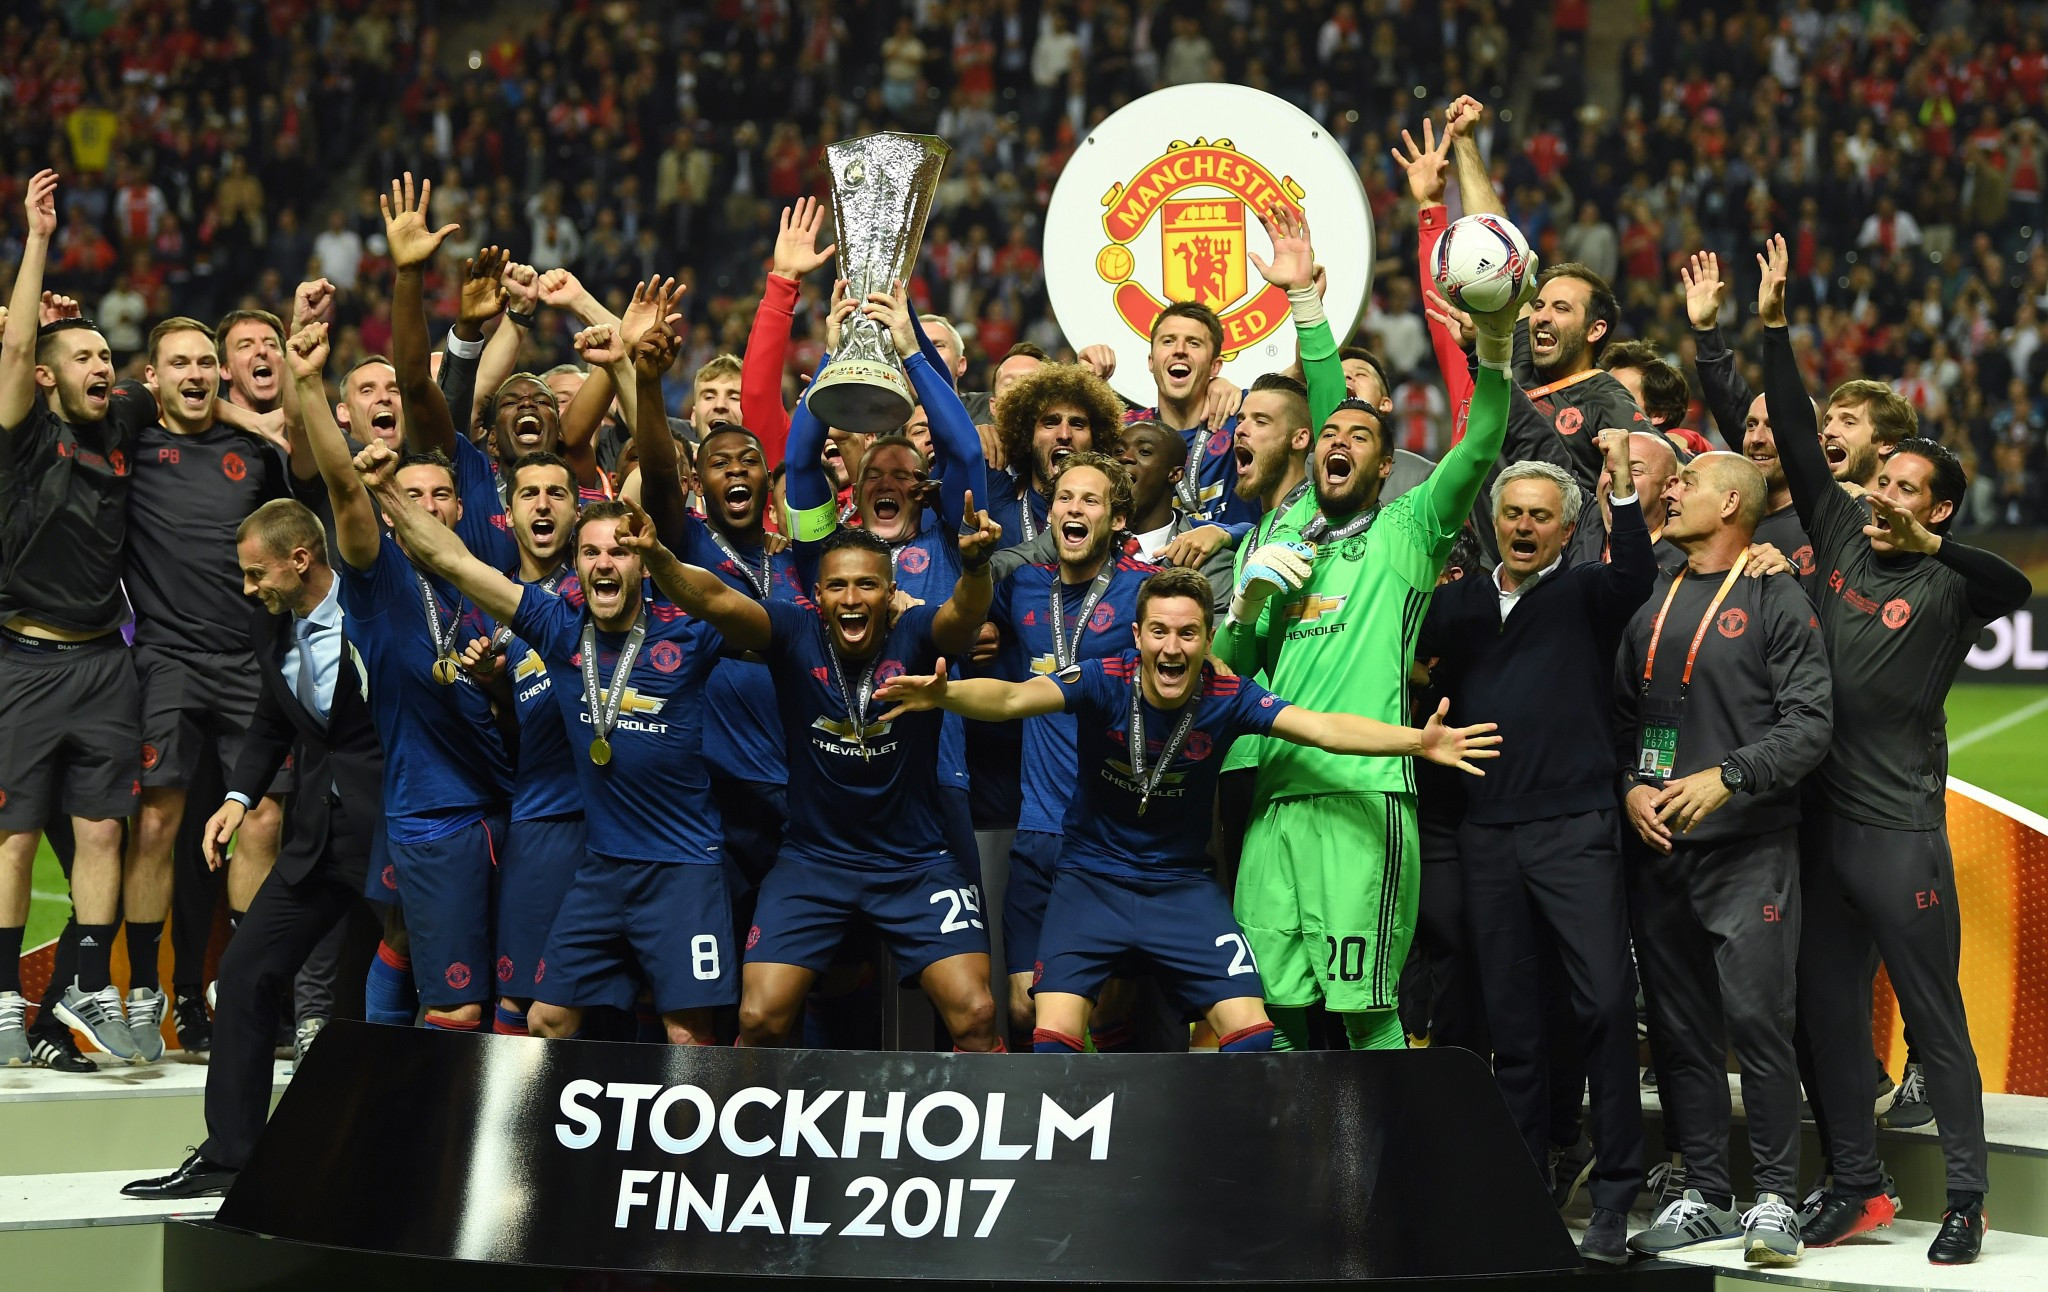 English Premier League giants Manchester United have been fined £8,900 for breaching anti-doping regulations following their UEFA Europa League final victory over Dutch side Ajax in May ©Getty Images